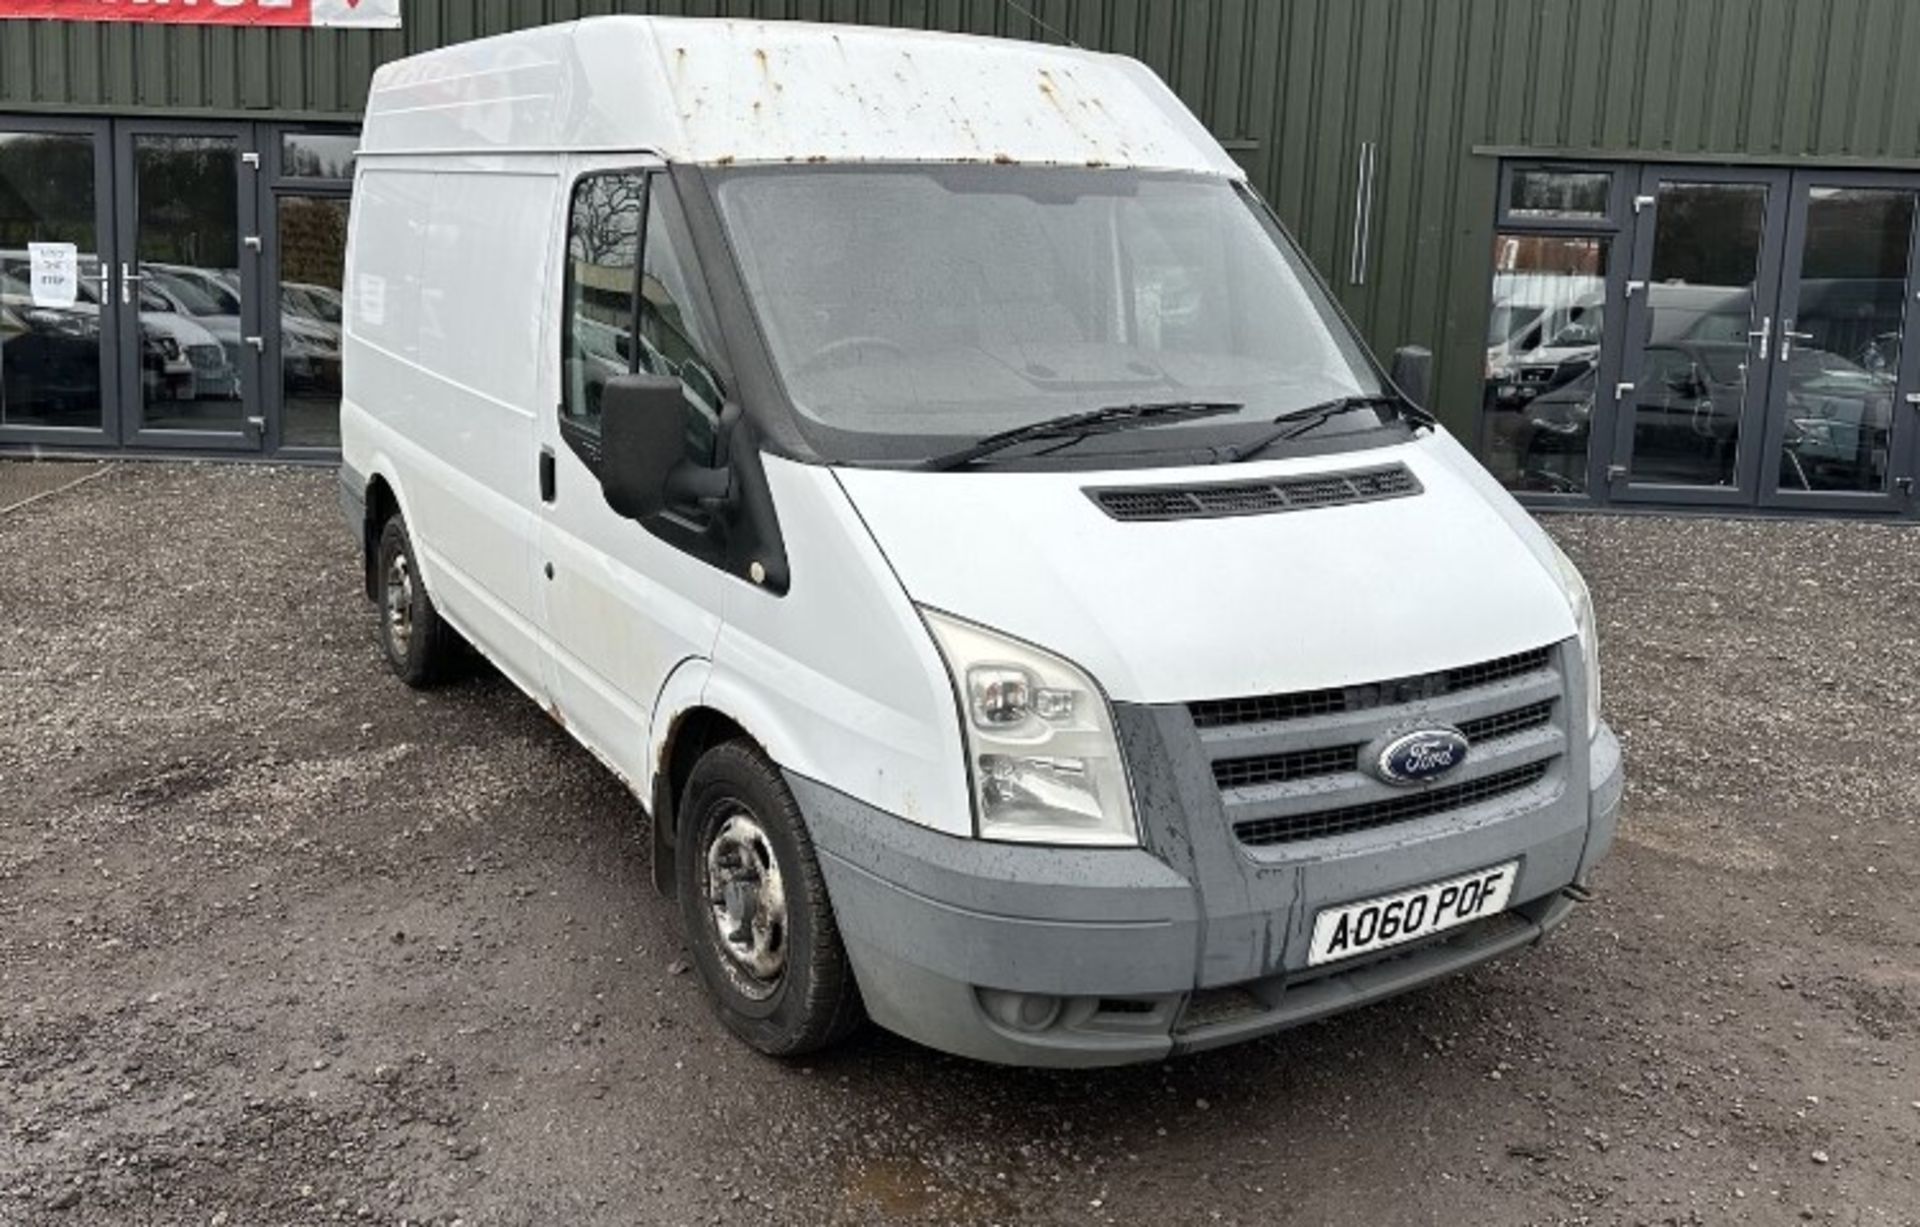 RELIABLE WORKHORSE: 60 PLATE FORD TRANSIT 260, MEDIUM ROOF, READY TO TACKLE TASKS - Image 4 of 9